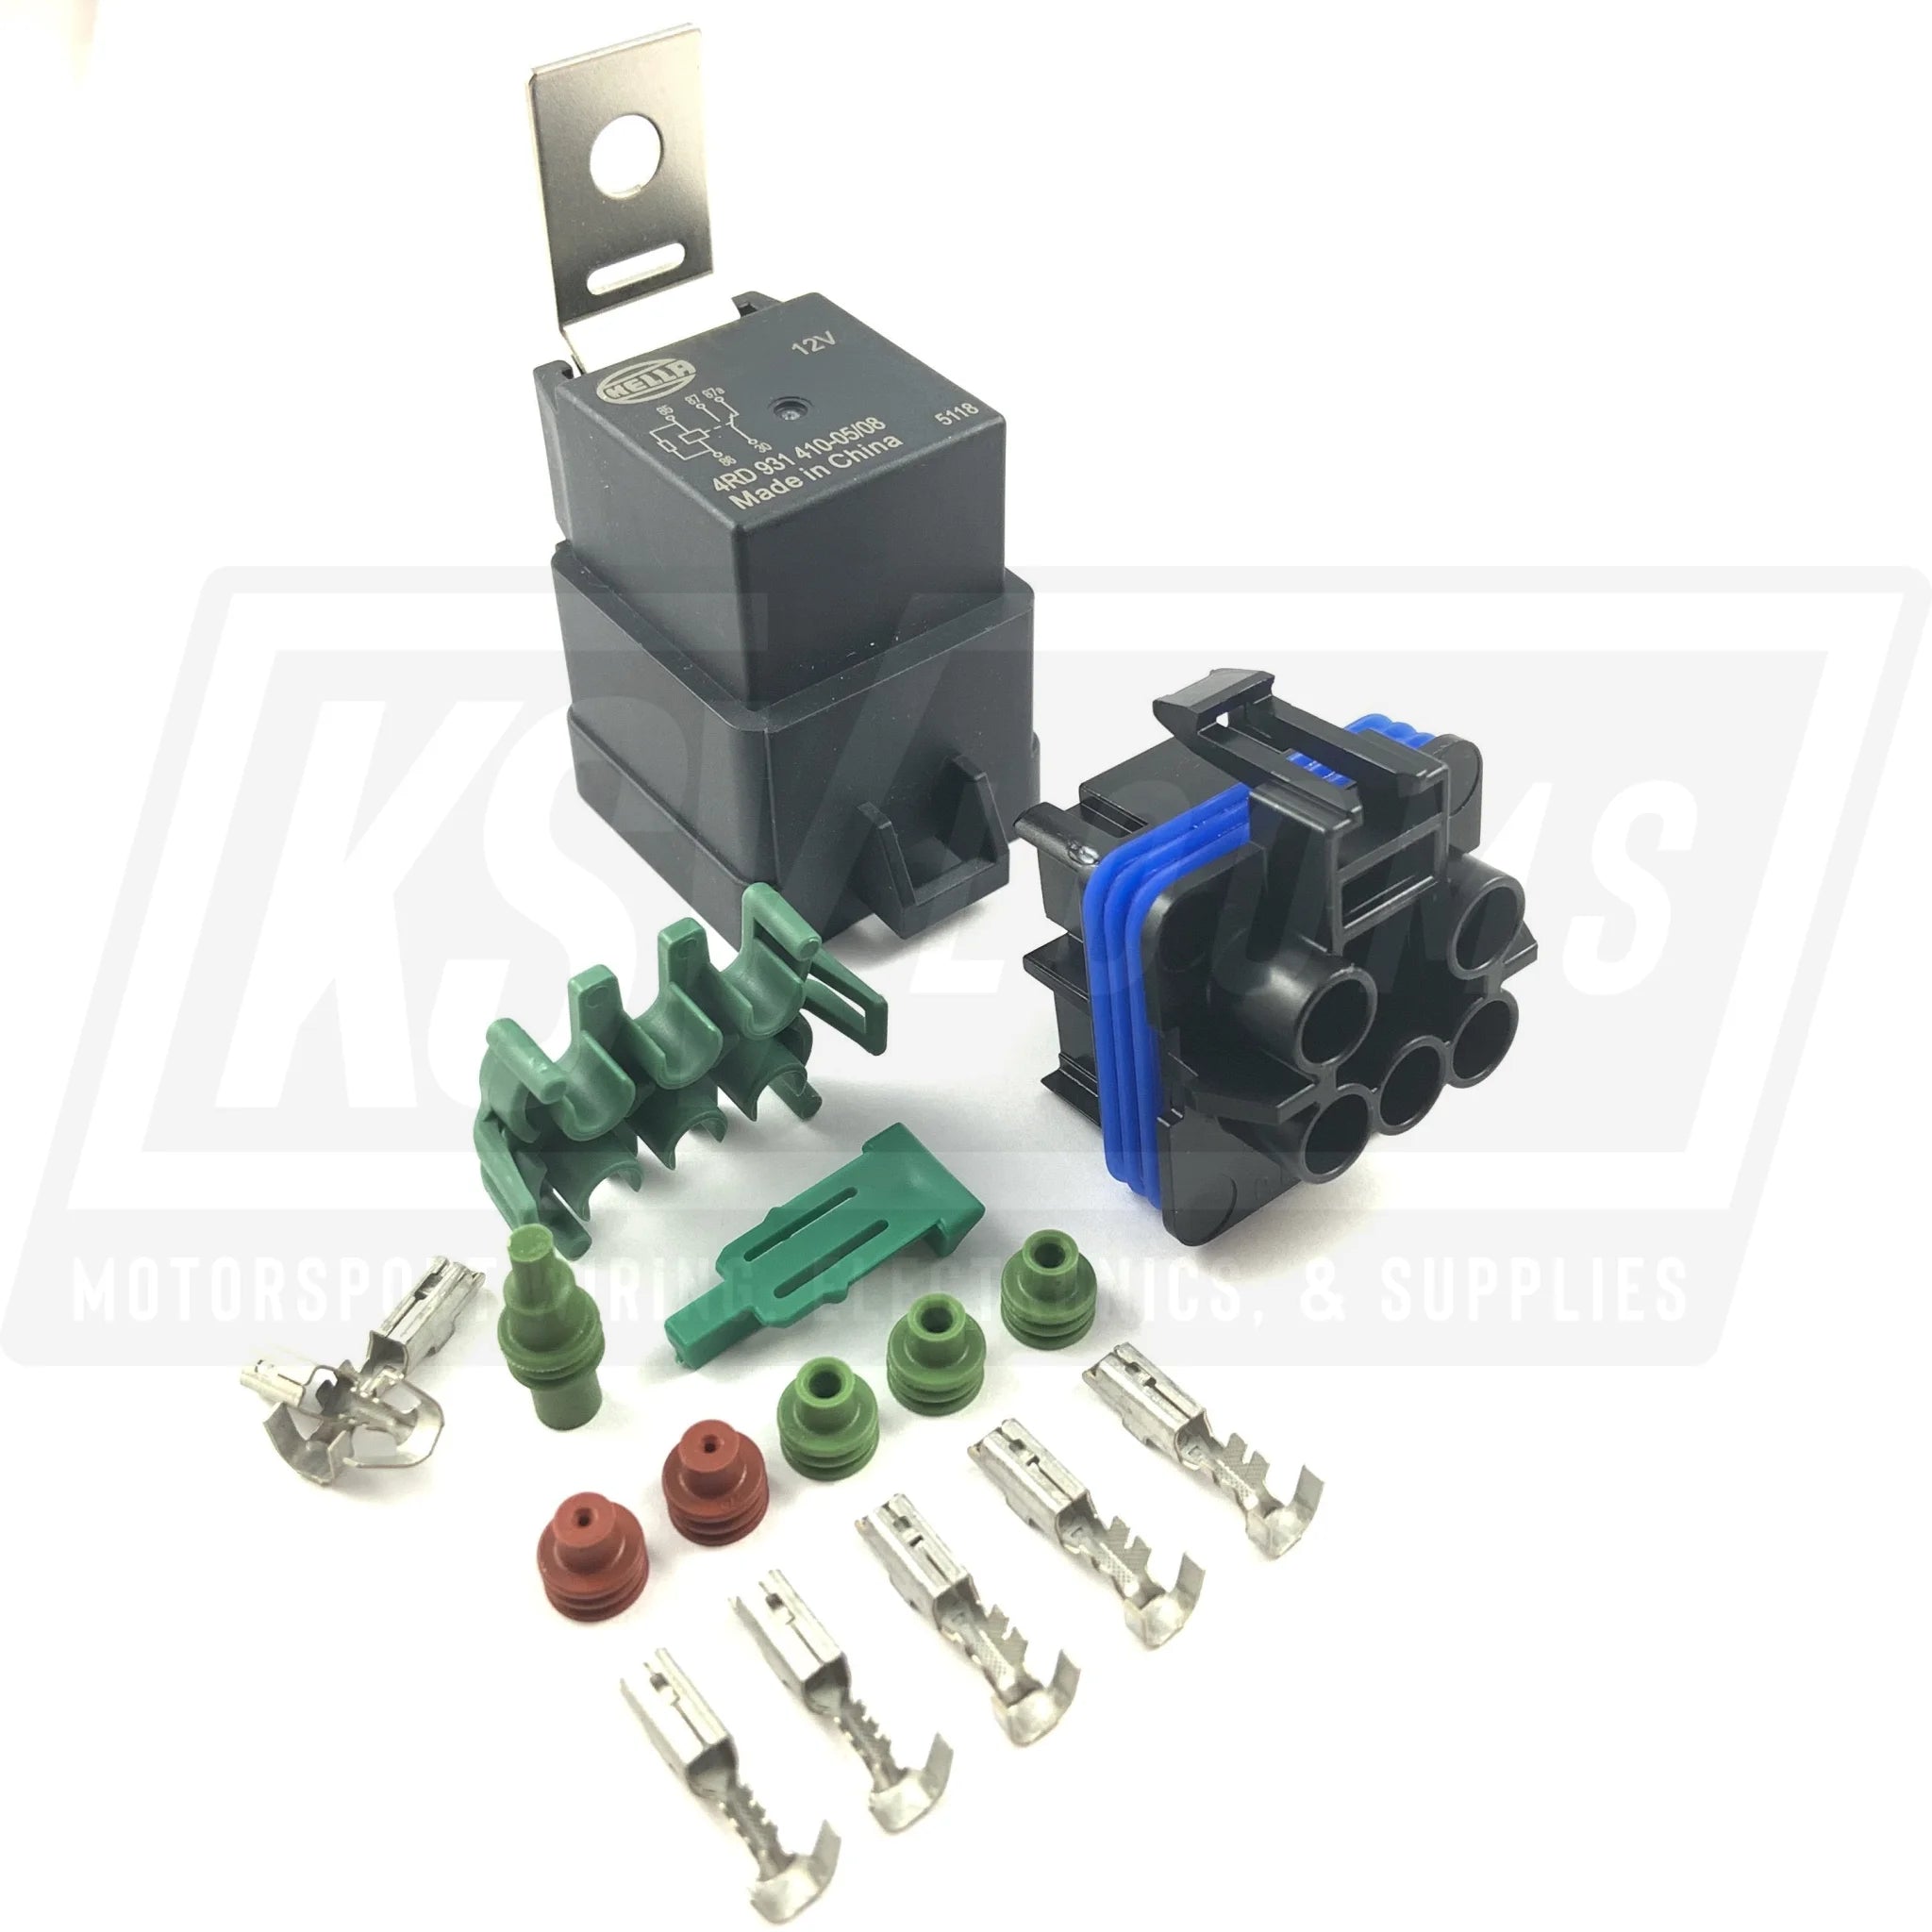 Hella H41410081 35A Sealed Relay with 5-Way Connector Kit